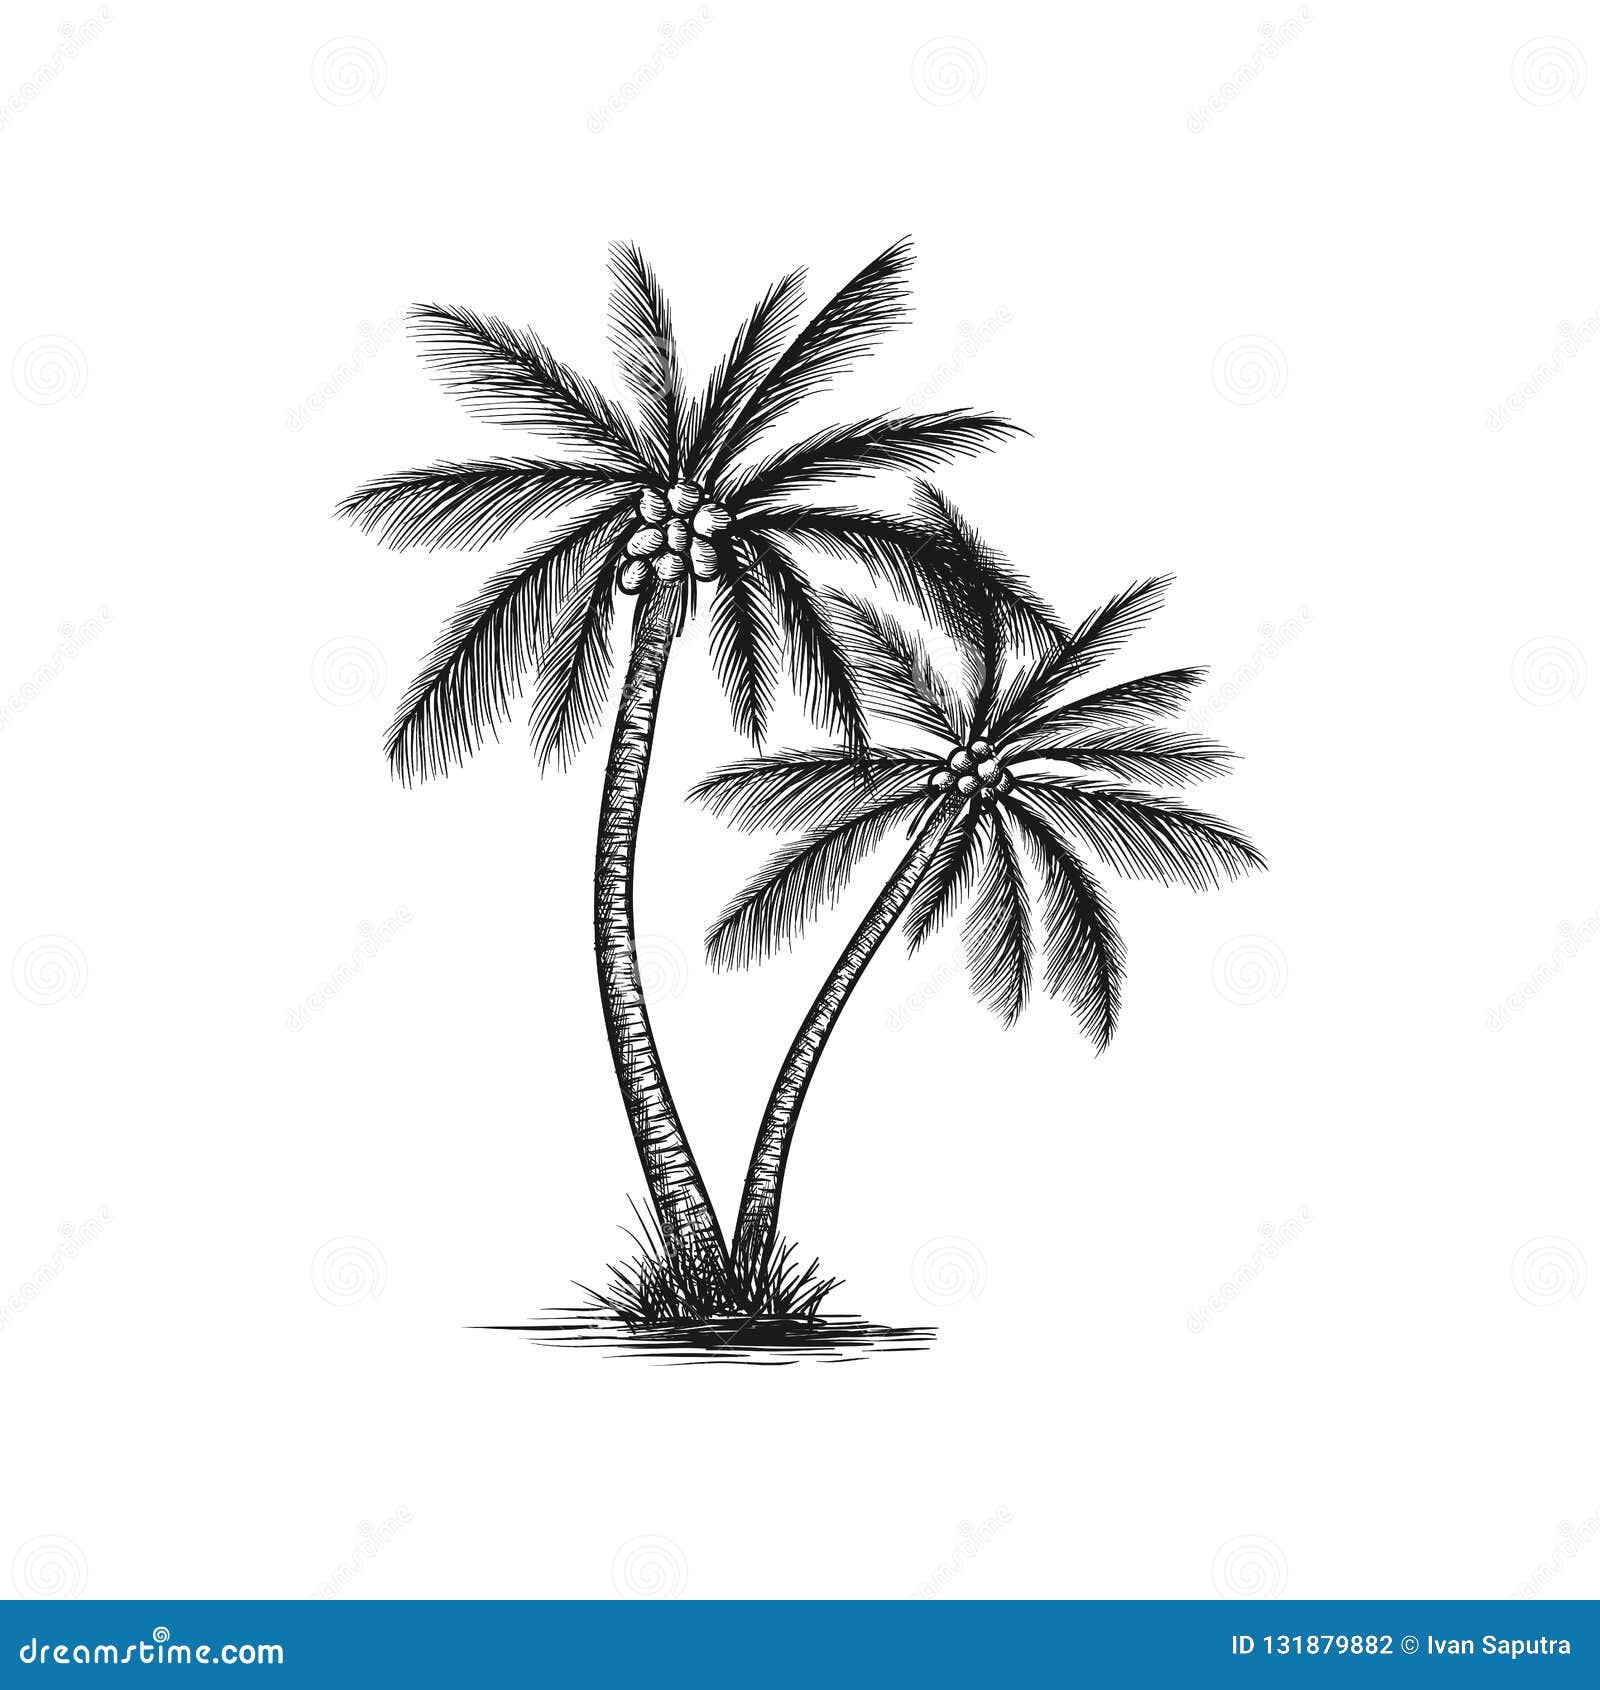 How to Draw a Palm Tree for Kids - How to Draw Easy